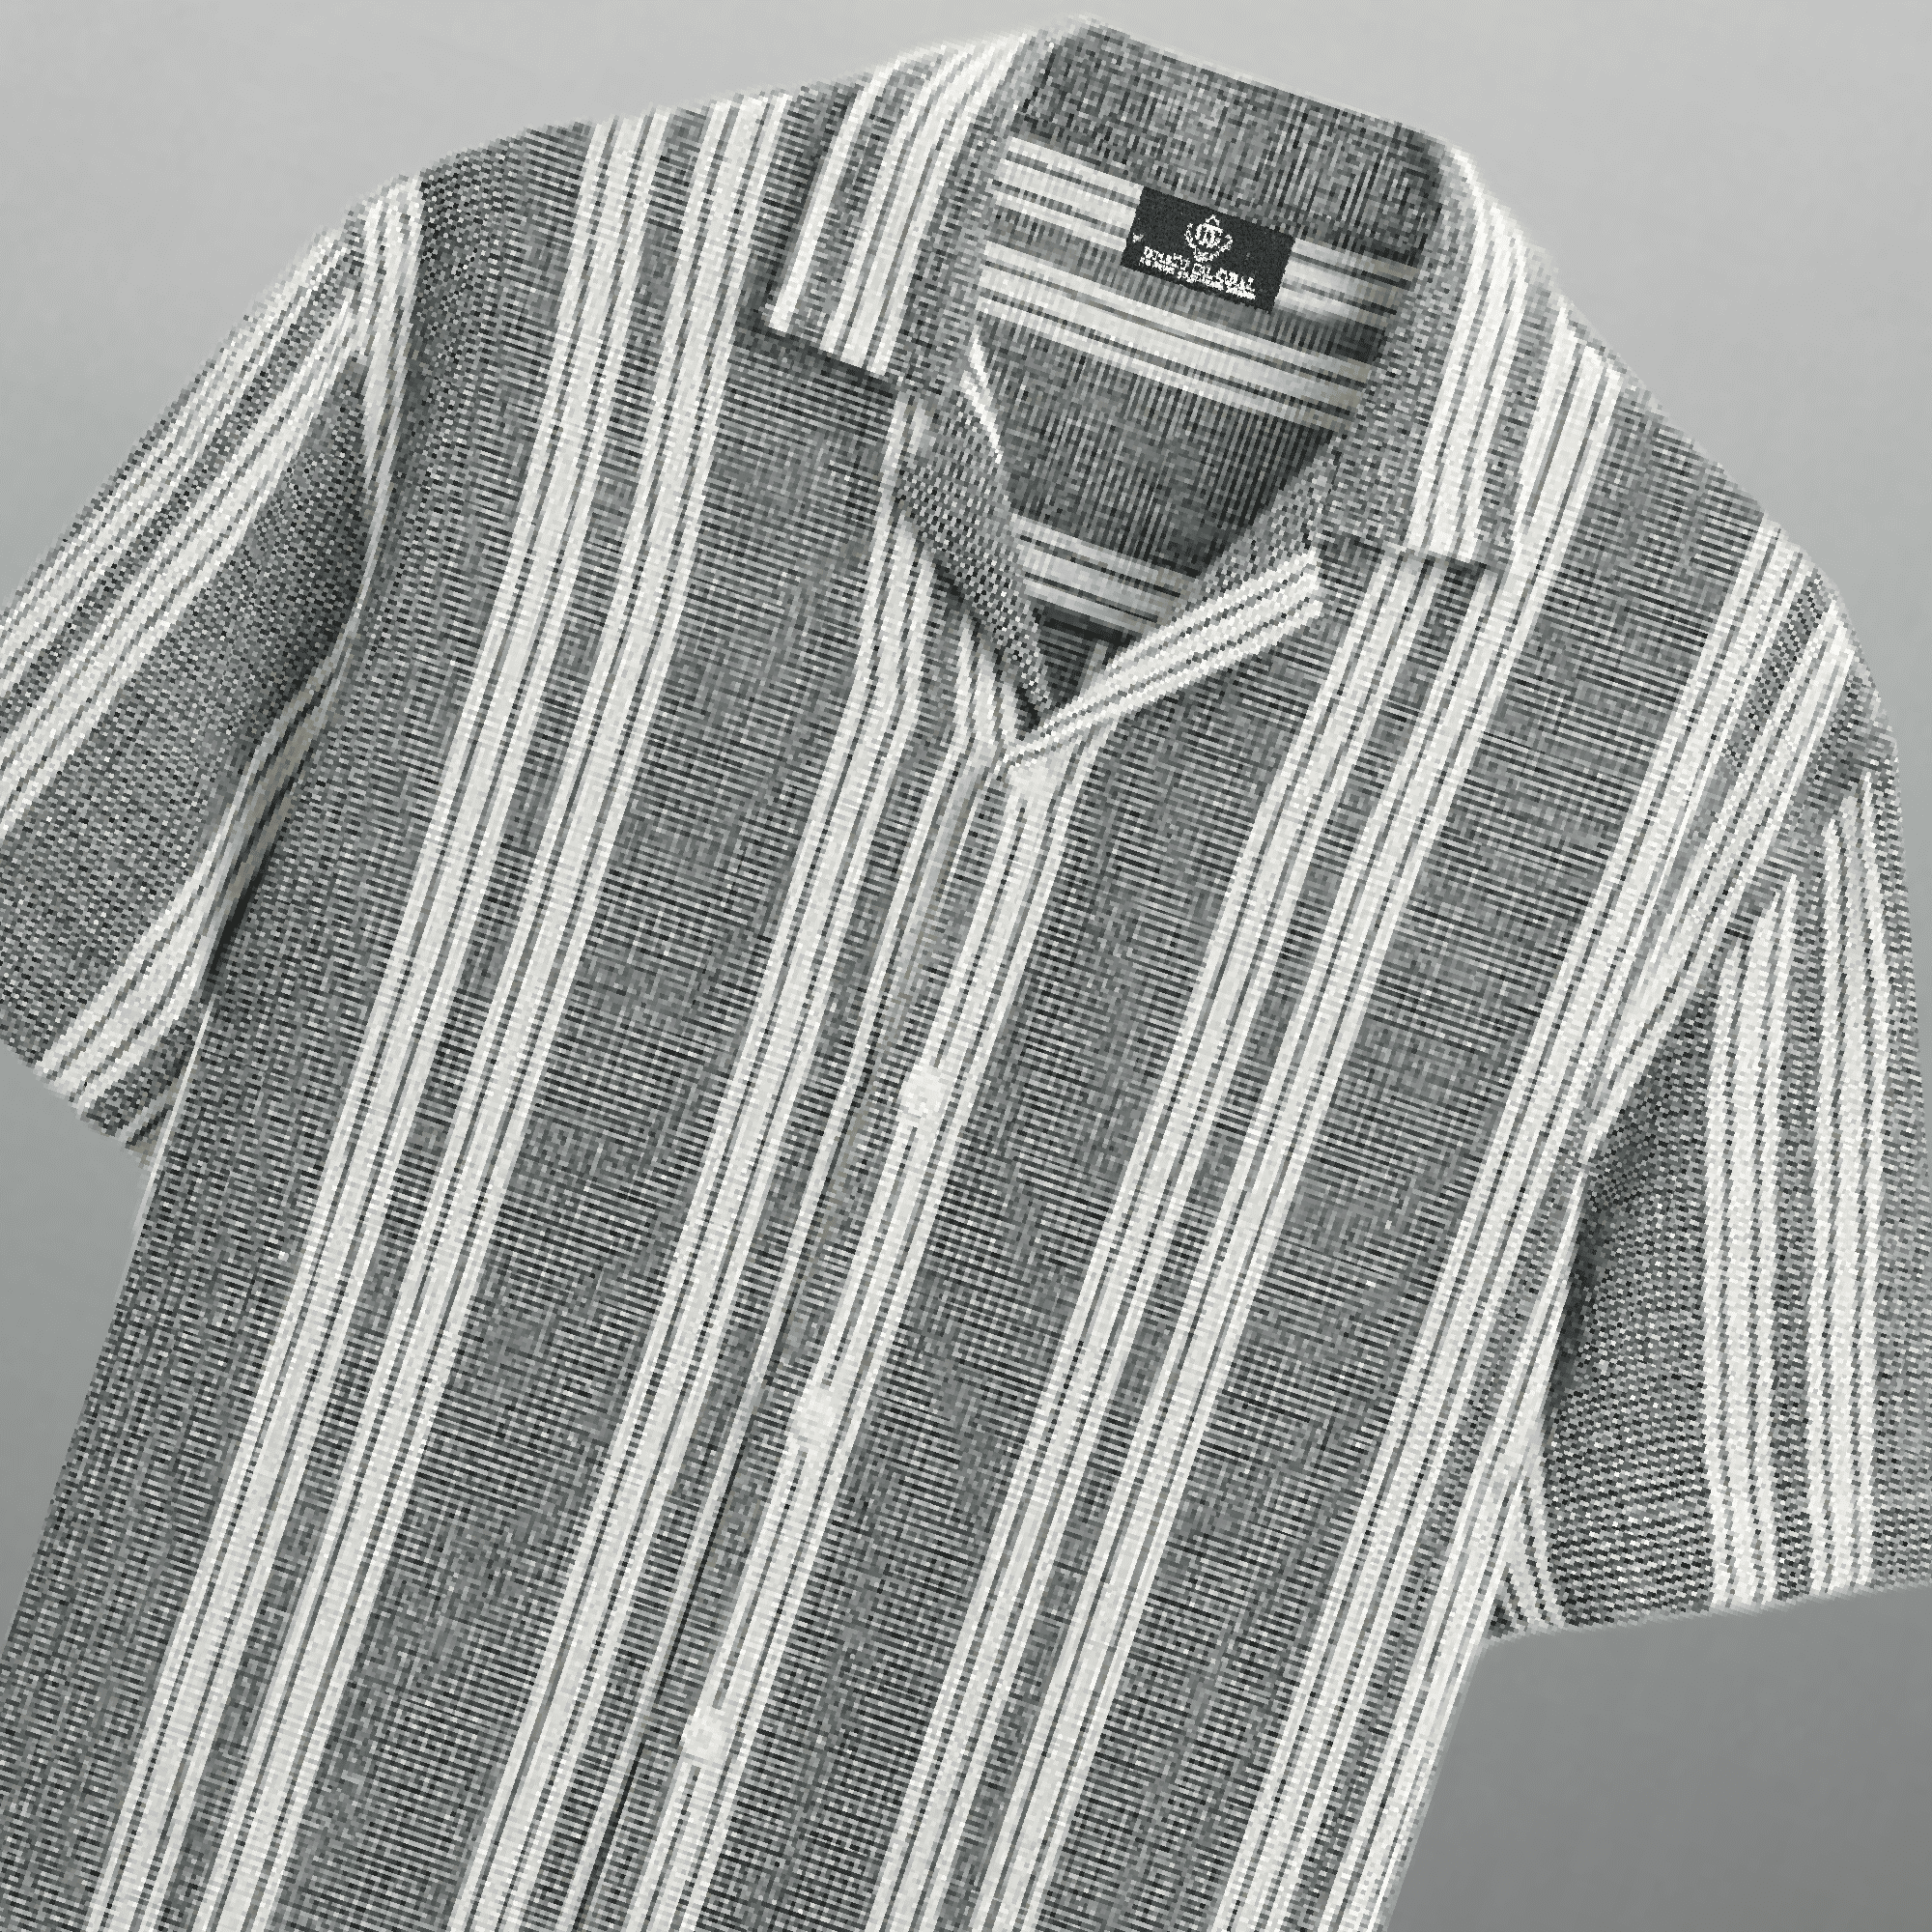 Men's Cotton Charcoal Grey & White colored striped shirt-RMS018